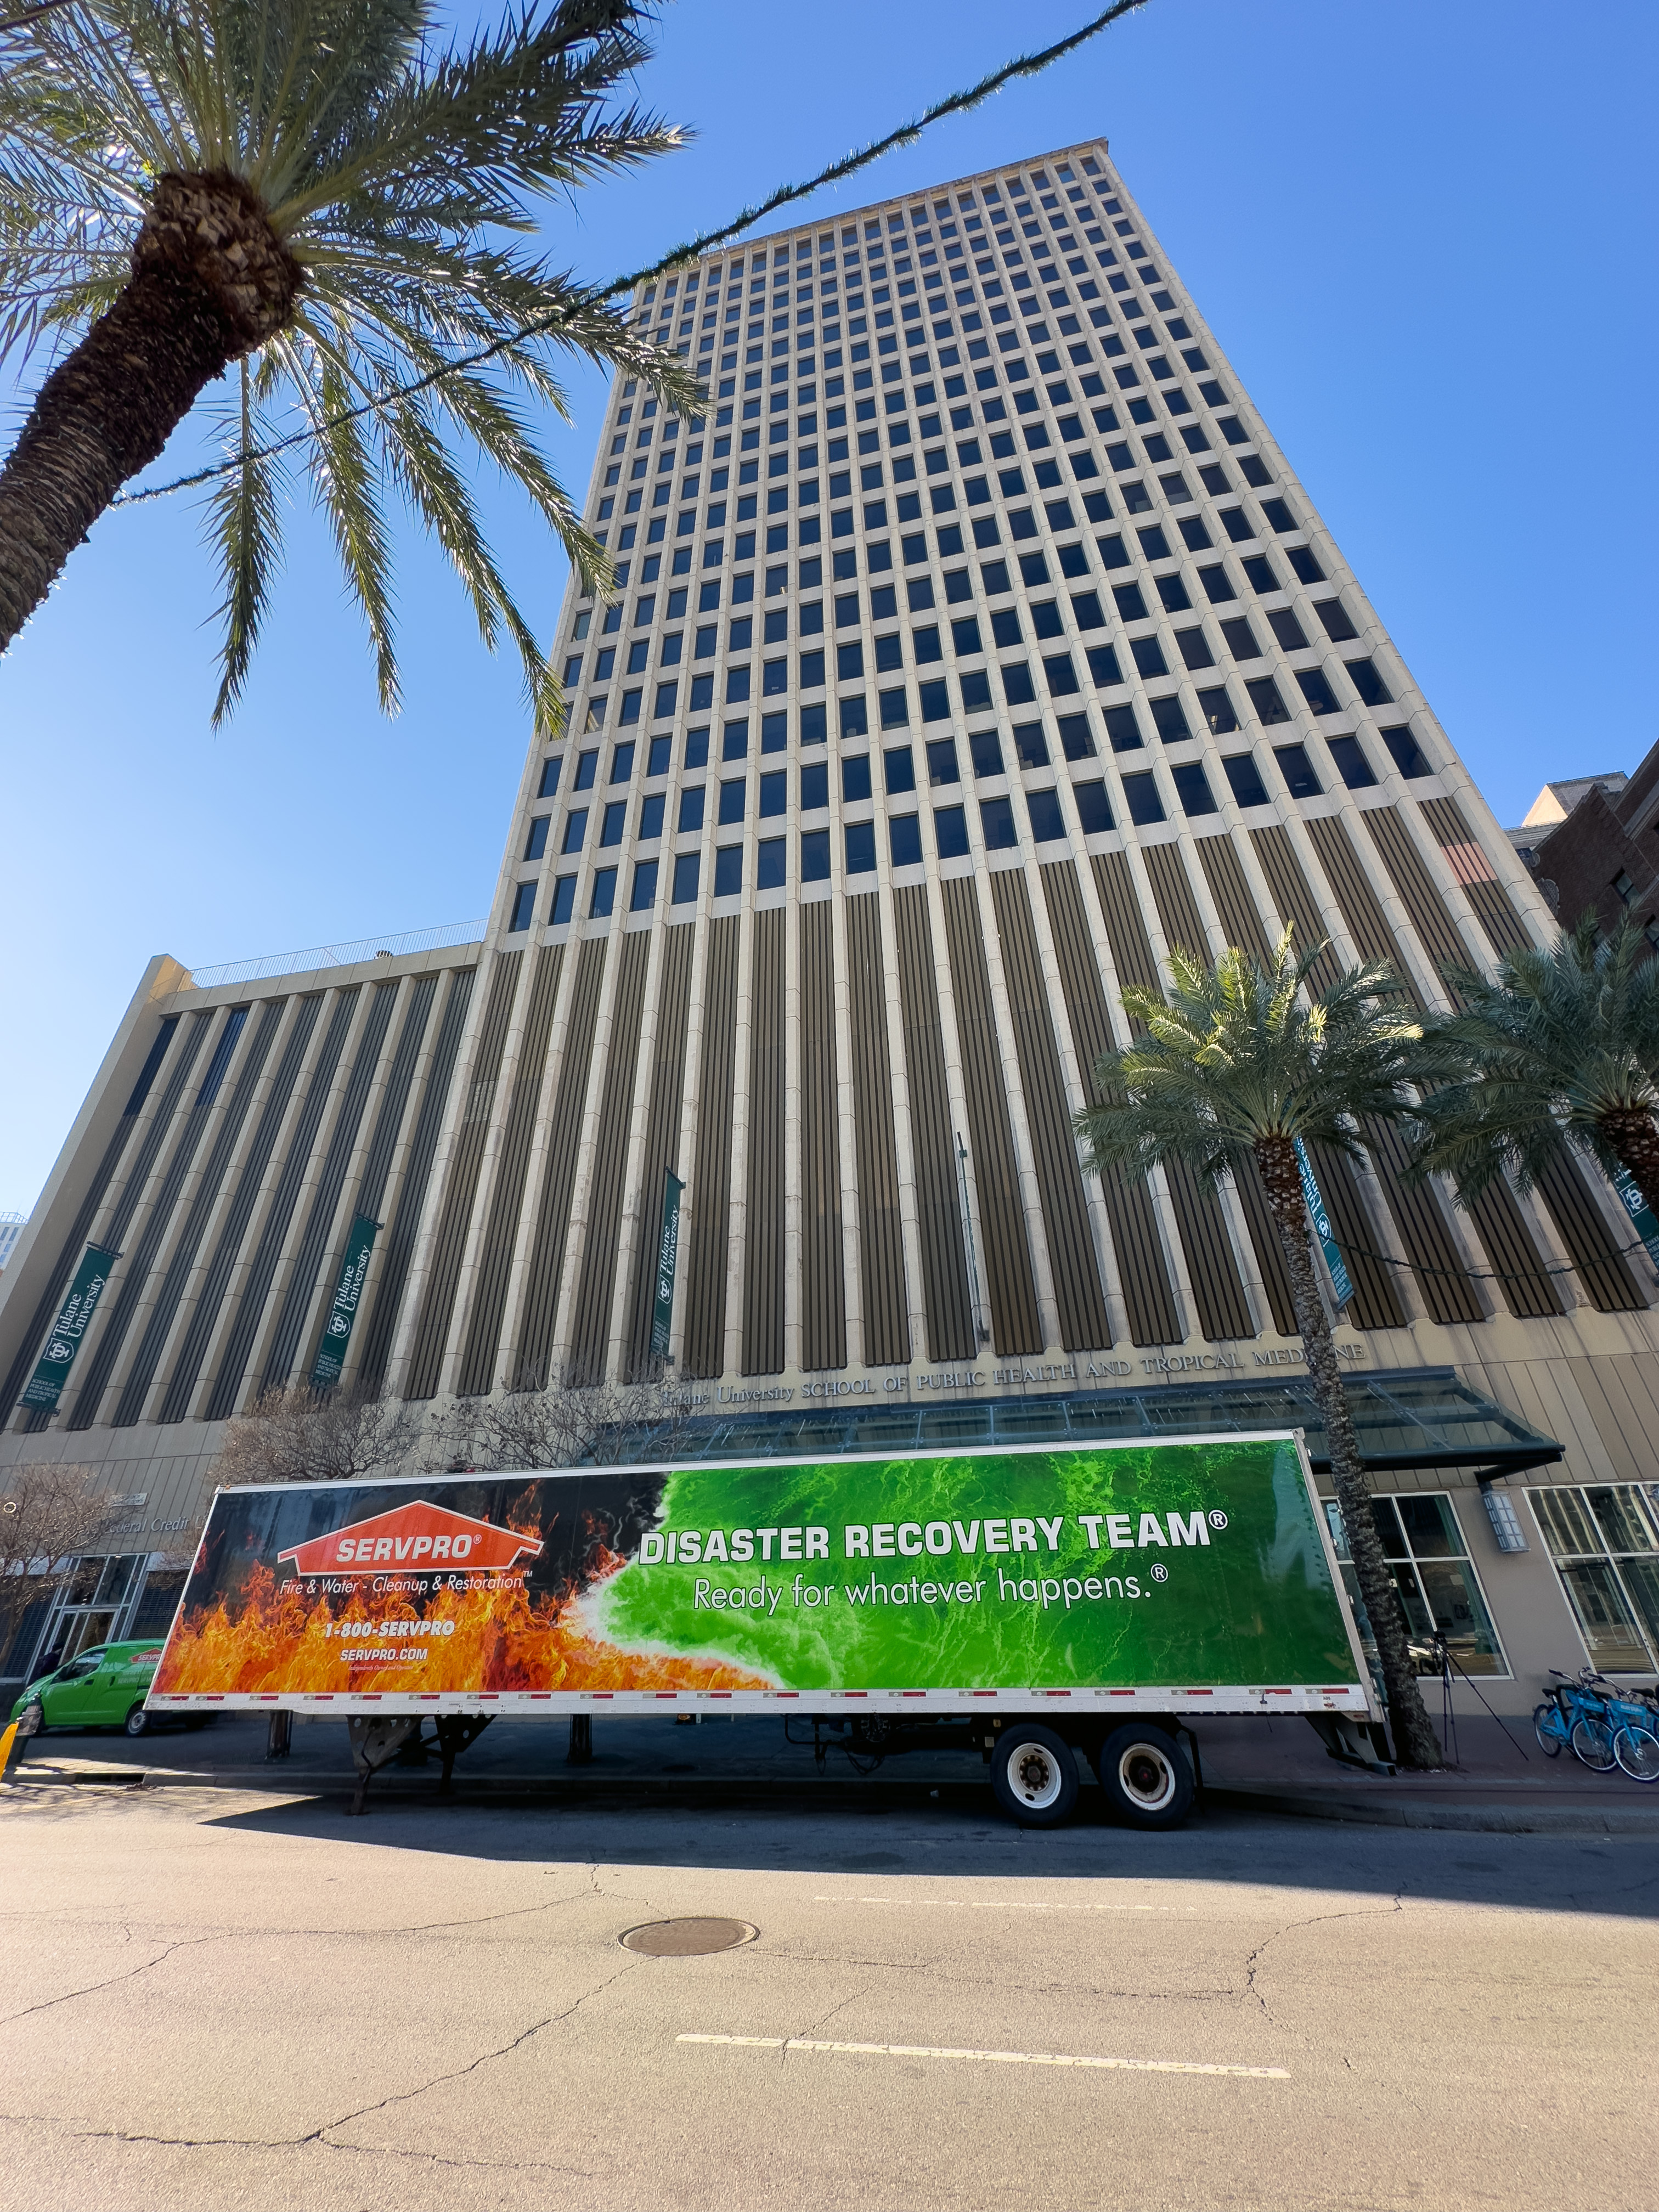 The SERVPRO team had to deliver equipment in a tractor-trailer to this job site due to massive water damage.